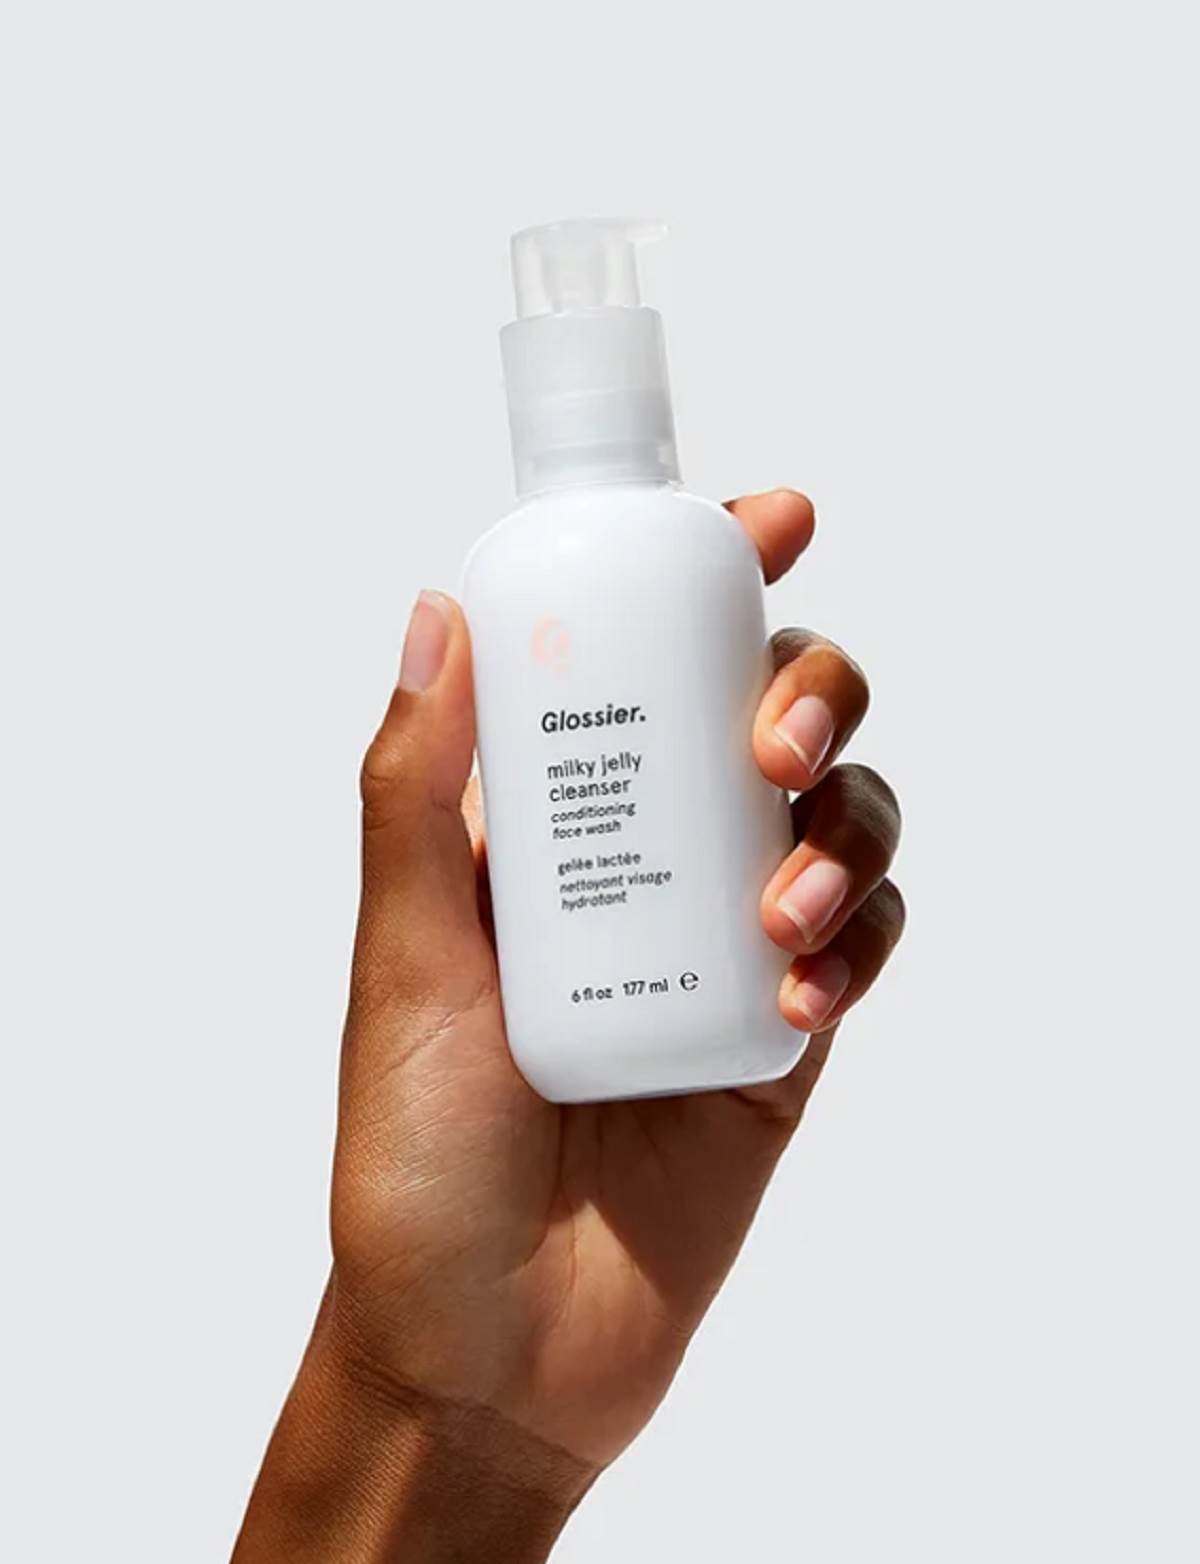  Glossier-Milky Jelly Cleanser. 